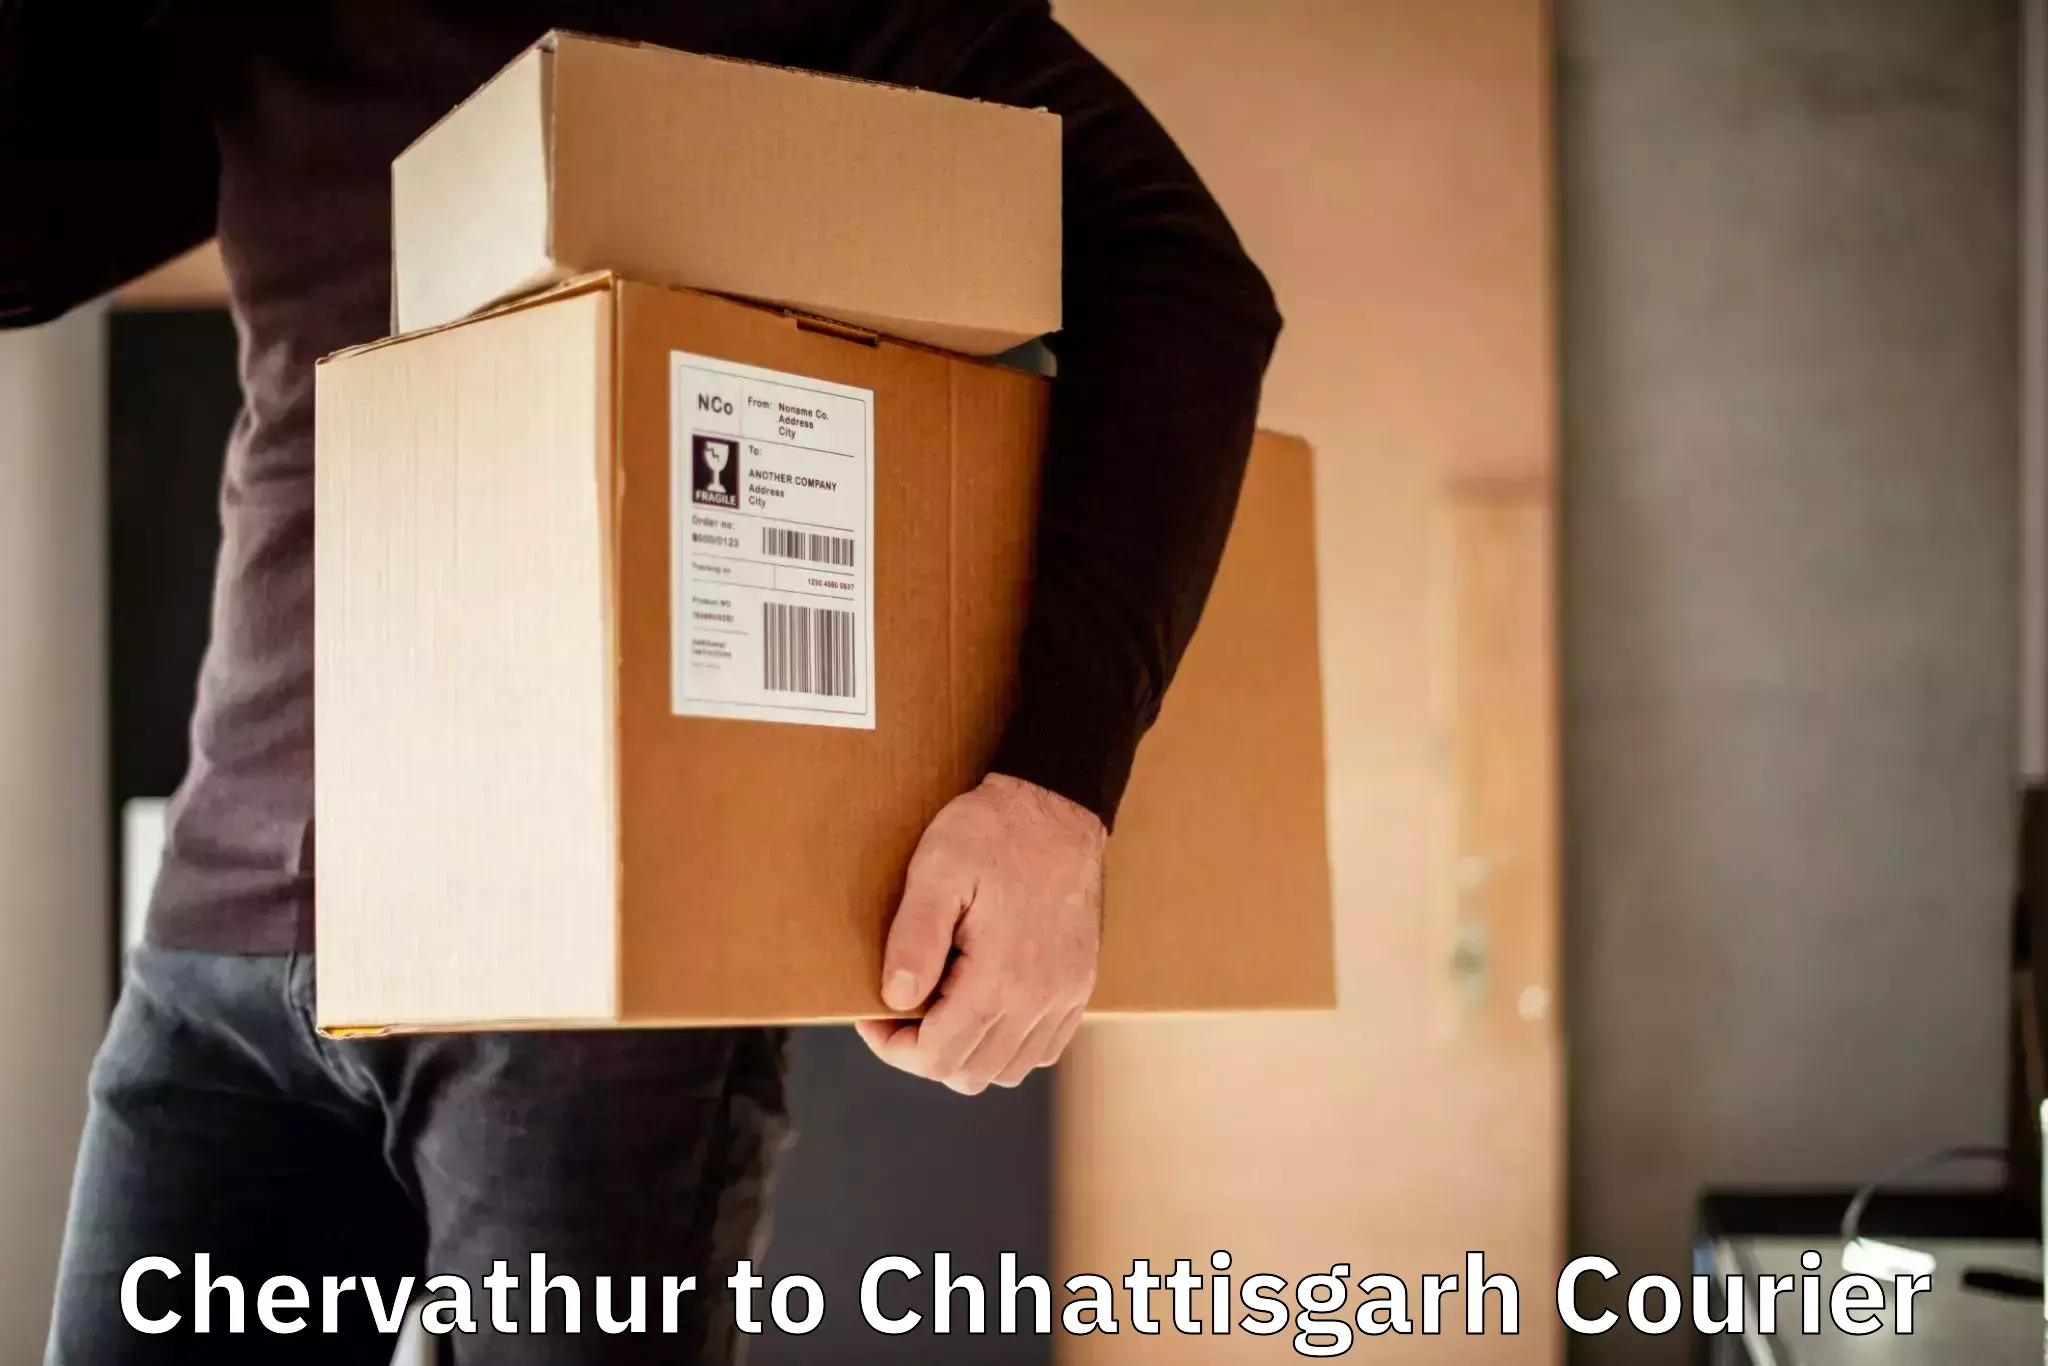 Delivery service partnership Chervathur to IIT Bhilai